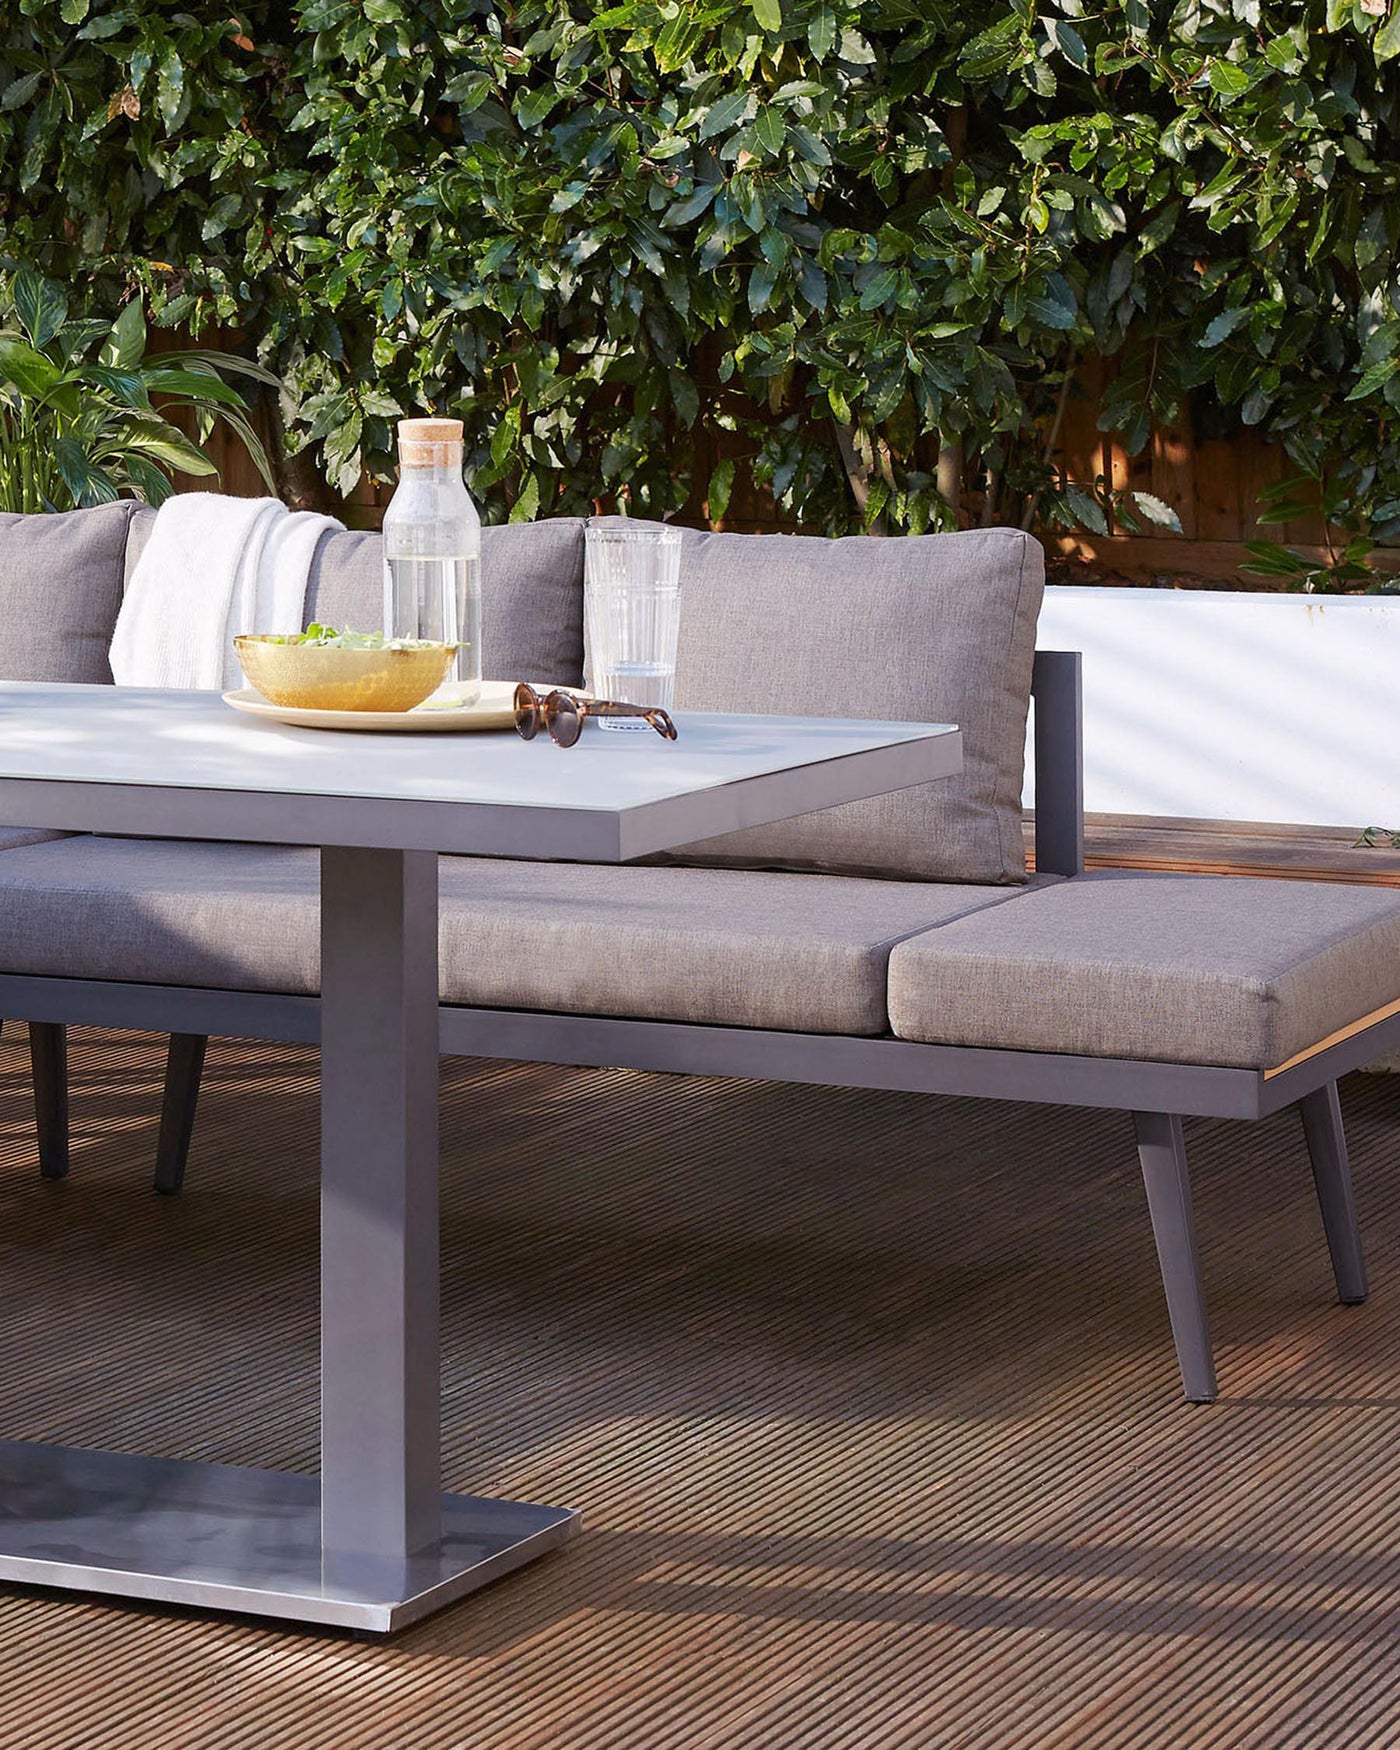 Modern outdoor furniture set featuring a sleek, grey aluminium frame. Includes a rectangular low-profile coffee table with a white tabletop and a matching corner sectional sofa with light grey cushions and pillows. The ensemble is complemented by a coordinating ottoman resting against the sectional. Set against a backdrop of lush green foliage, creating a serene outdoor living space ambiance.